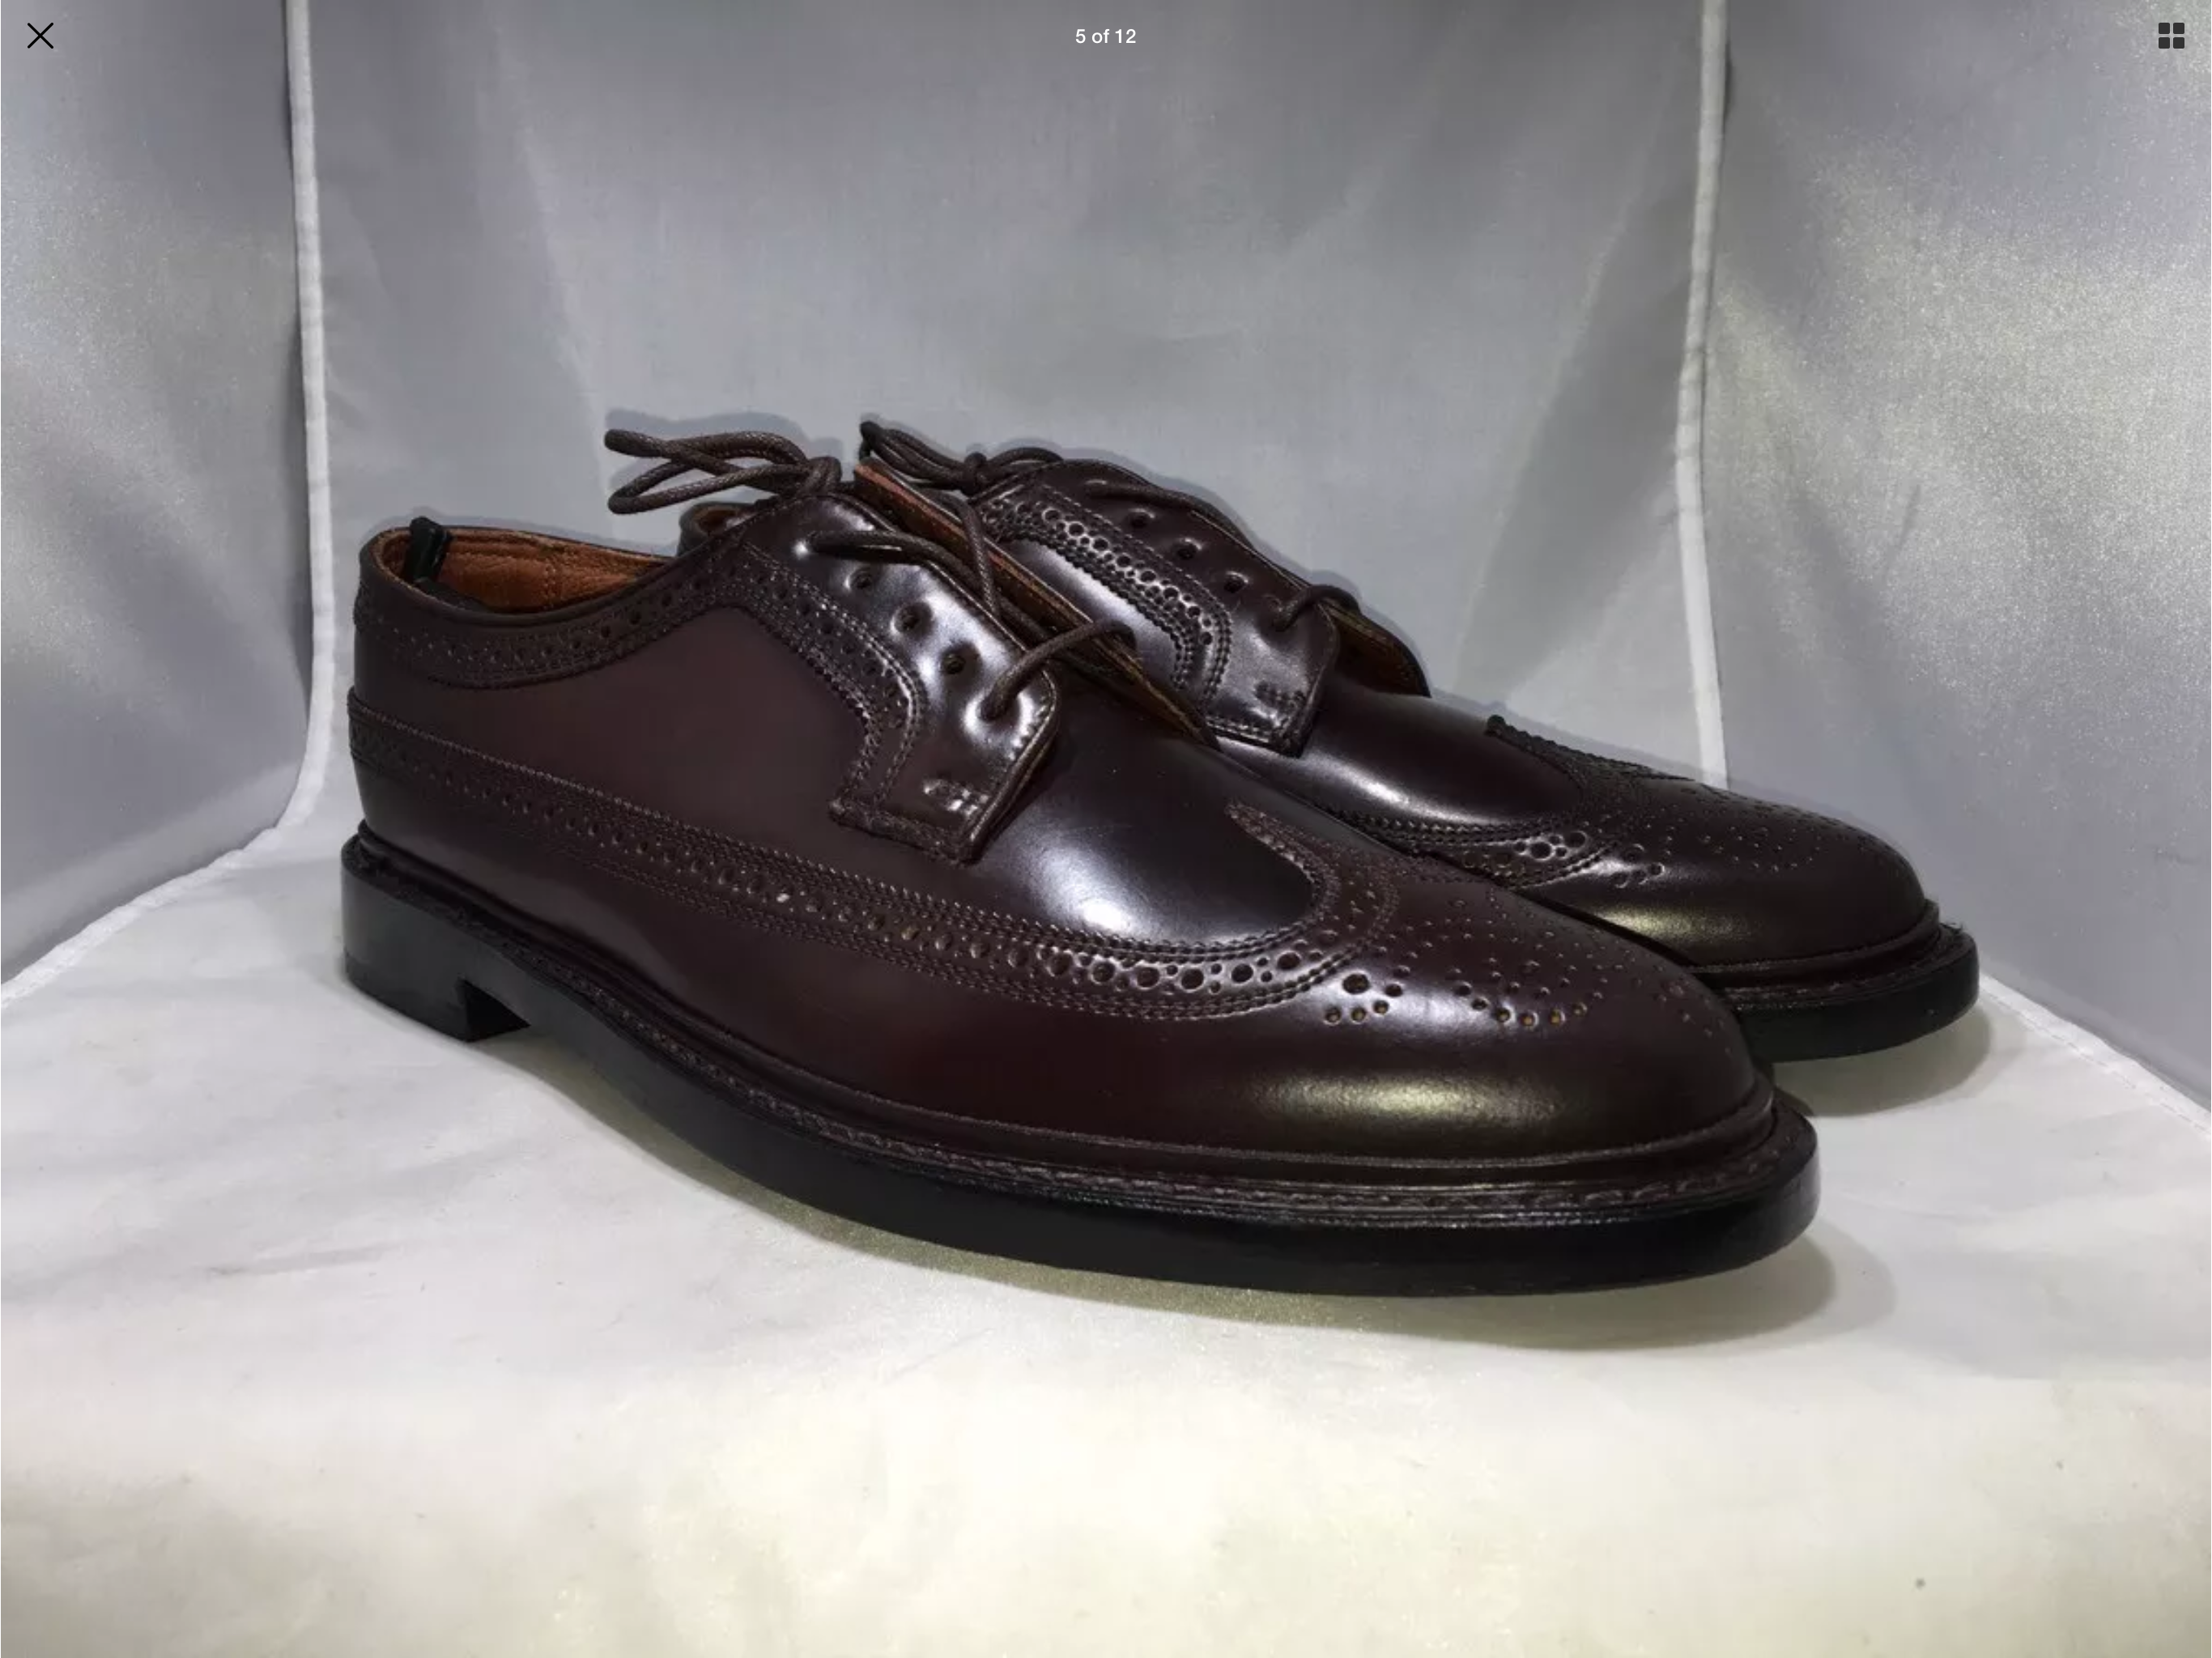 Check Out These Florsheim Imperial Shells... Did I Buy Wisely? | Styleforum